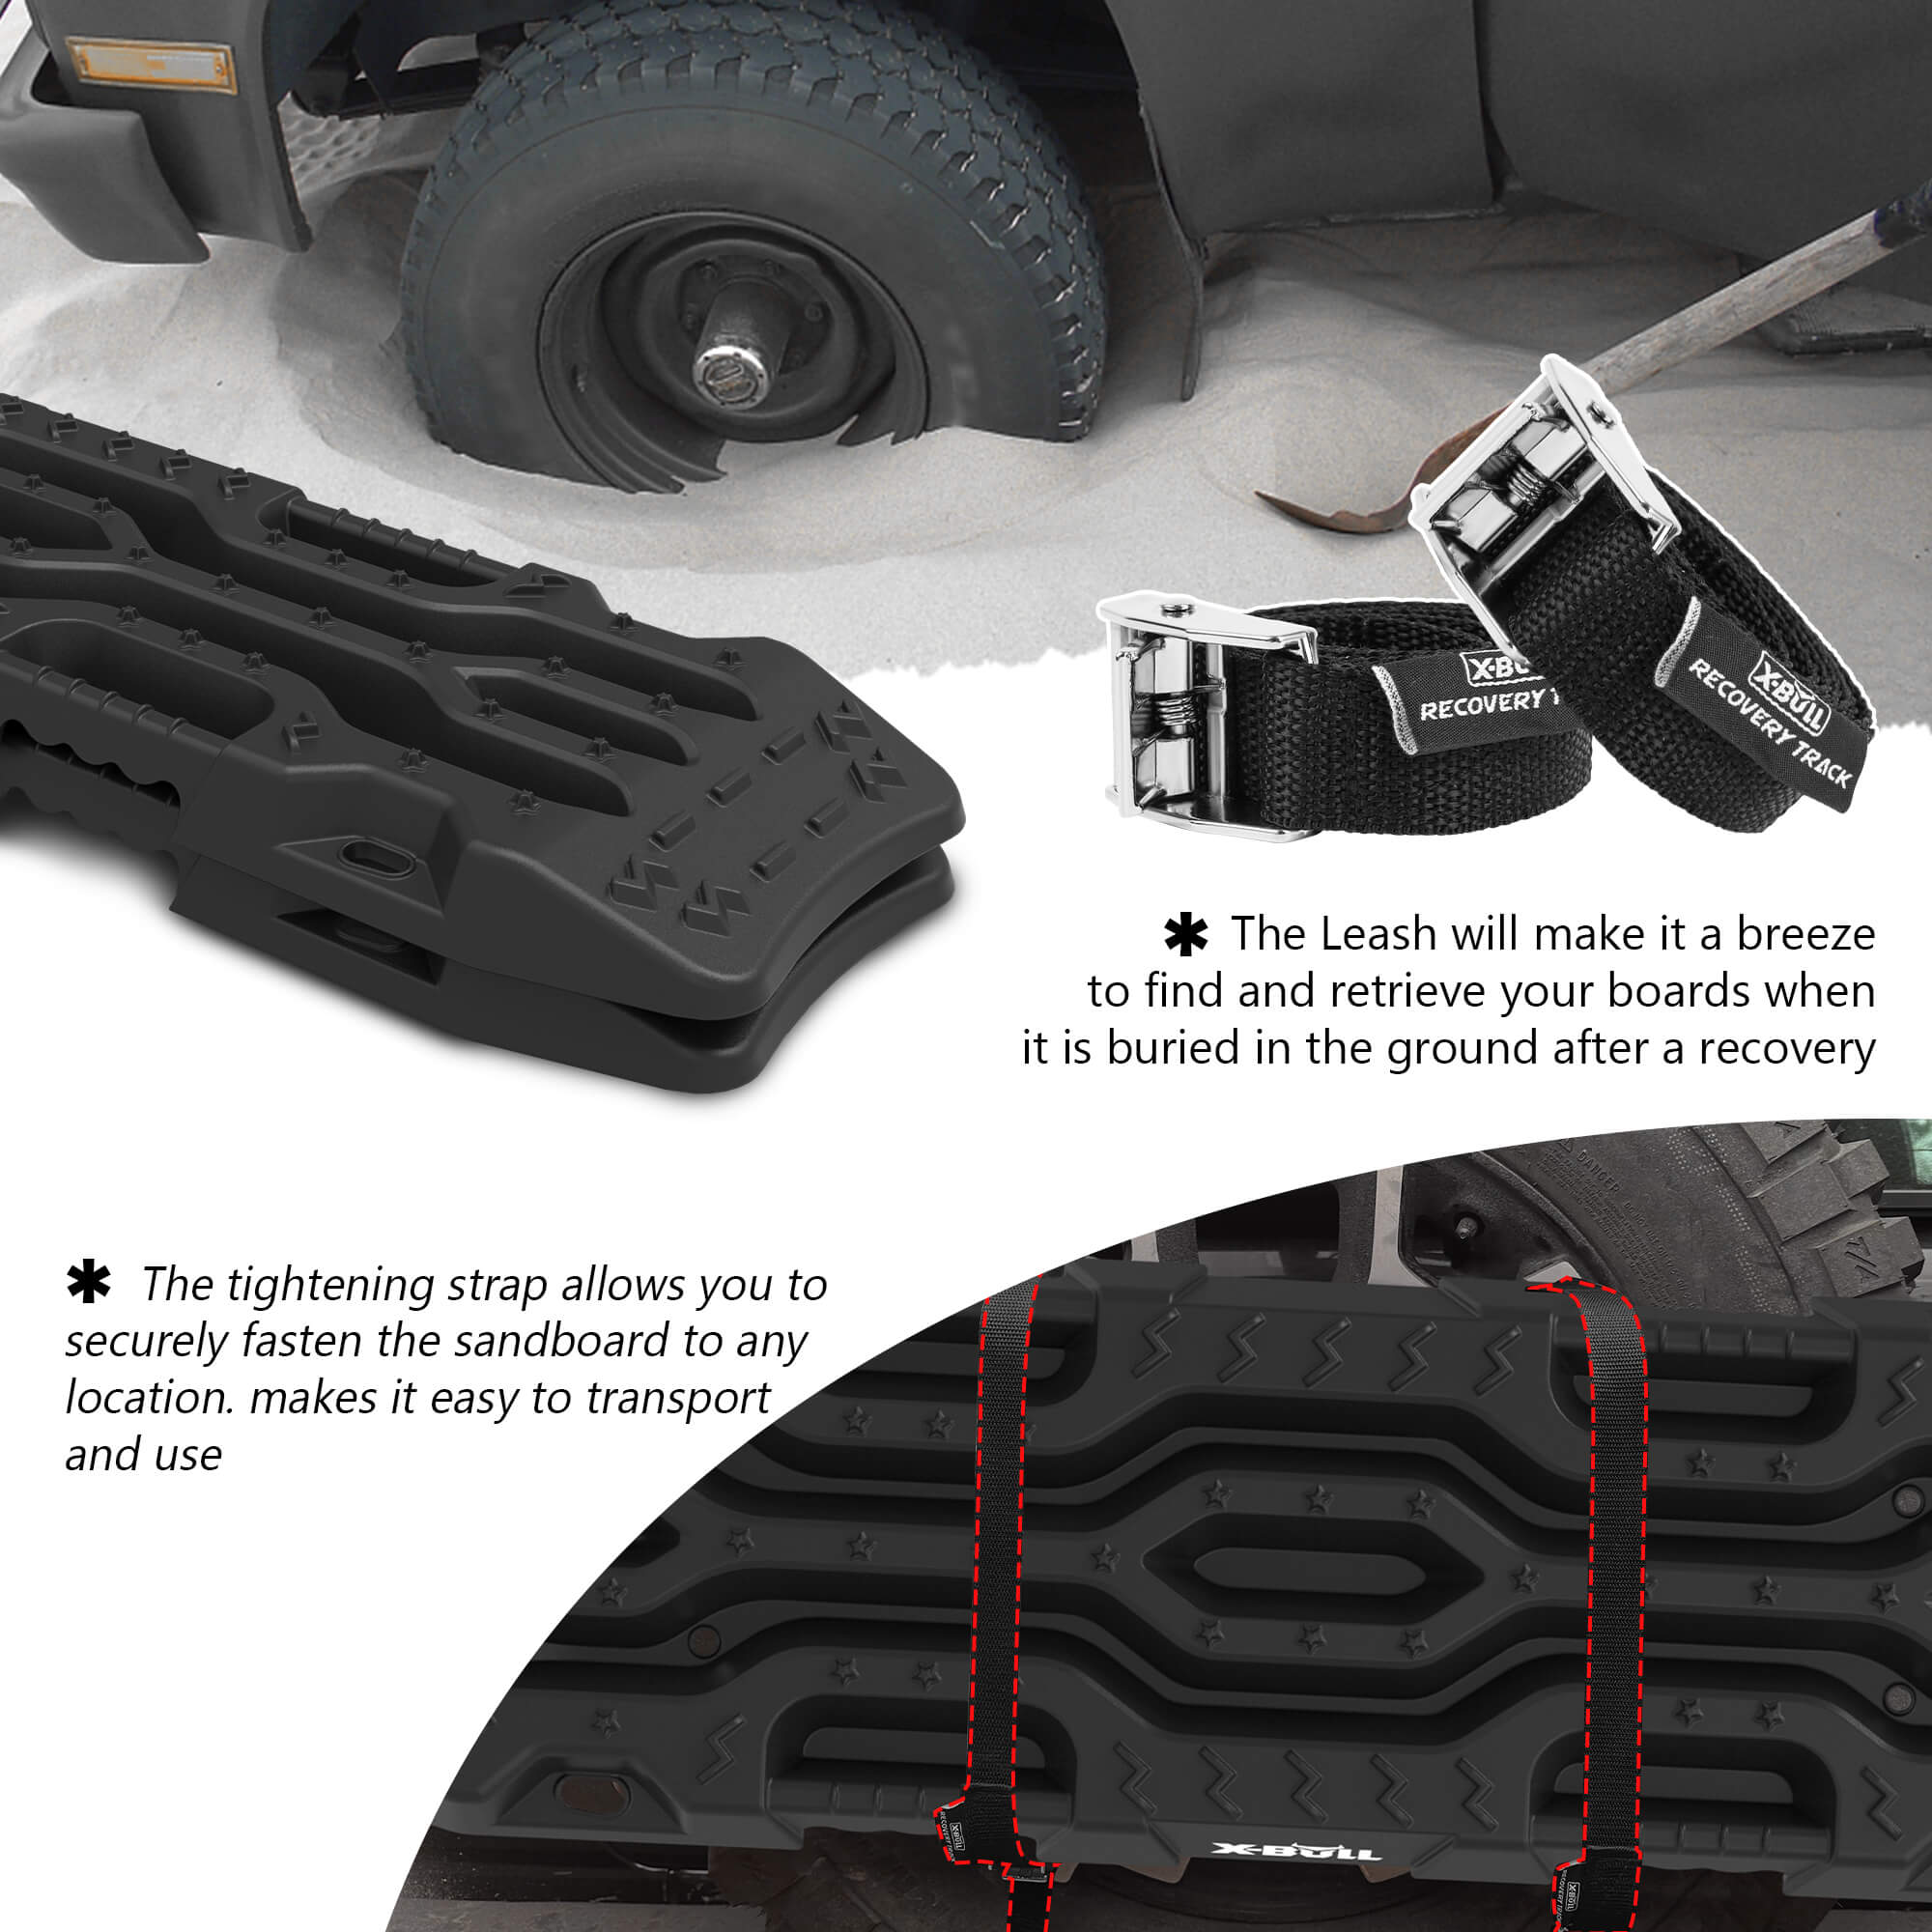 Durable 12T Sand Snow Mud Recovery Tracks Set - XBULL